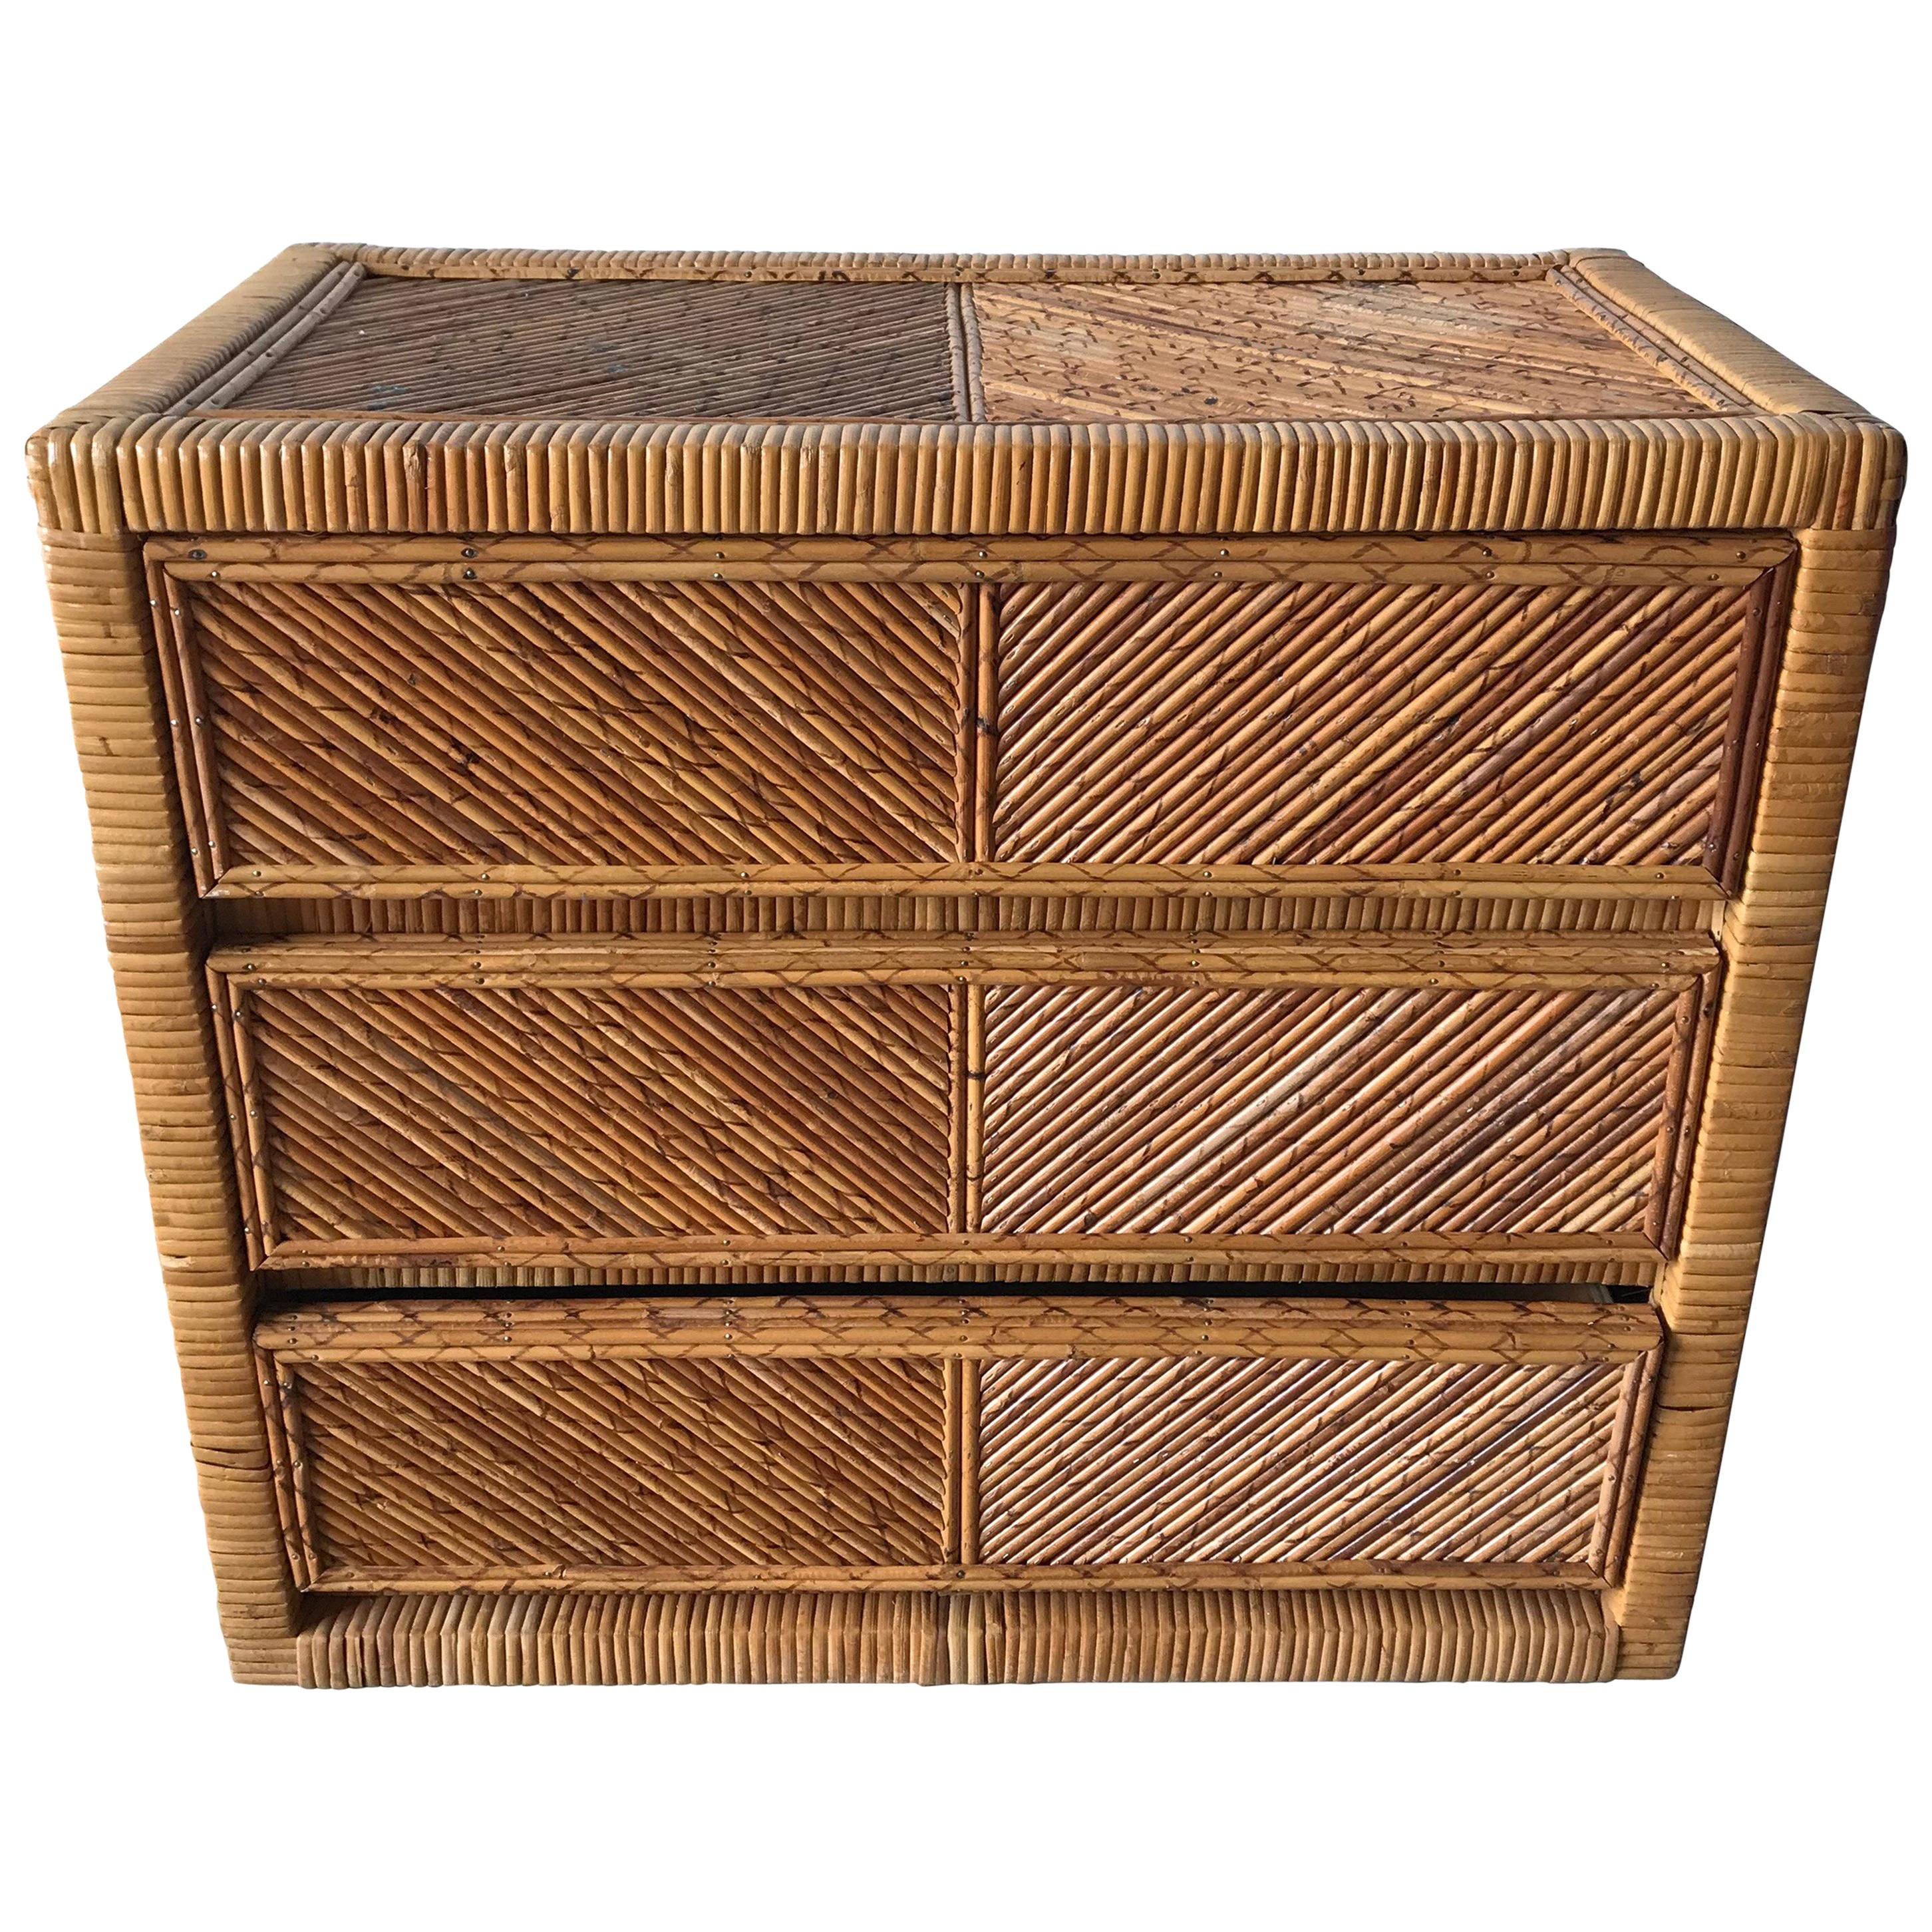 Rattan Wicker Bamboo Reed Dresser or Chest of Drawers